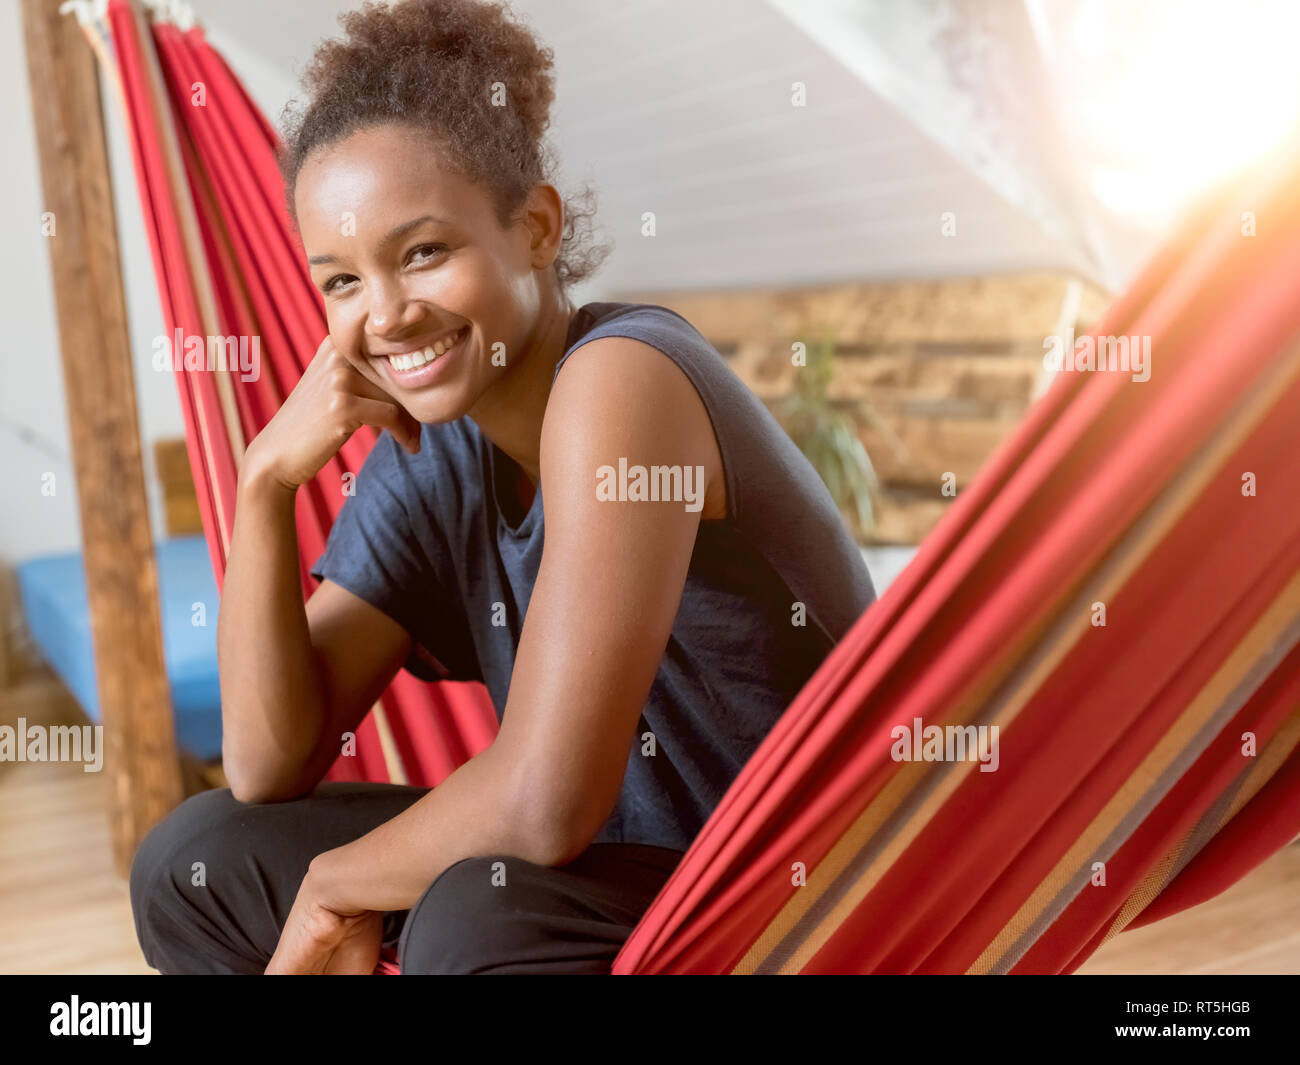 Portrait of happy young woman sitting in hammock Stock Photo